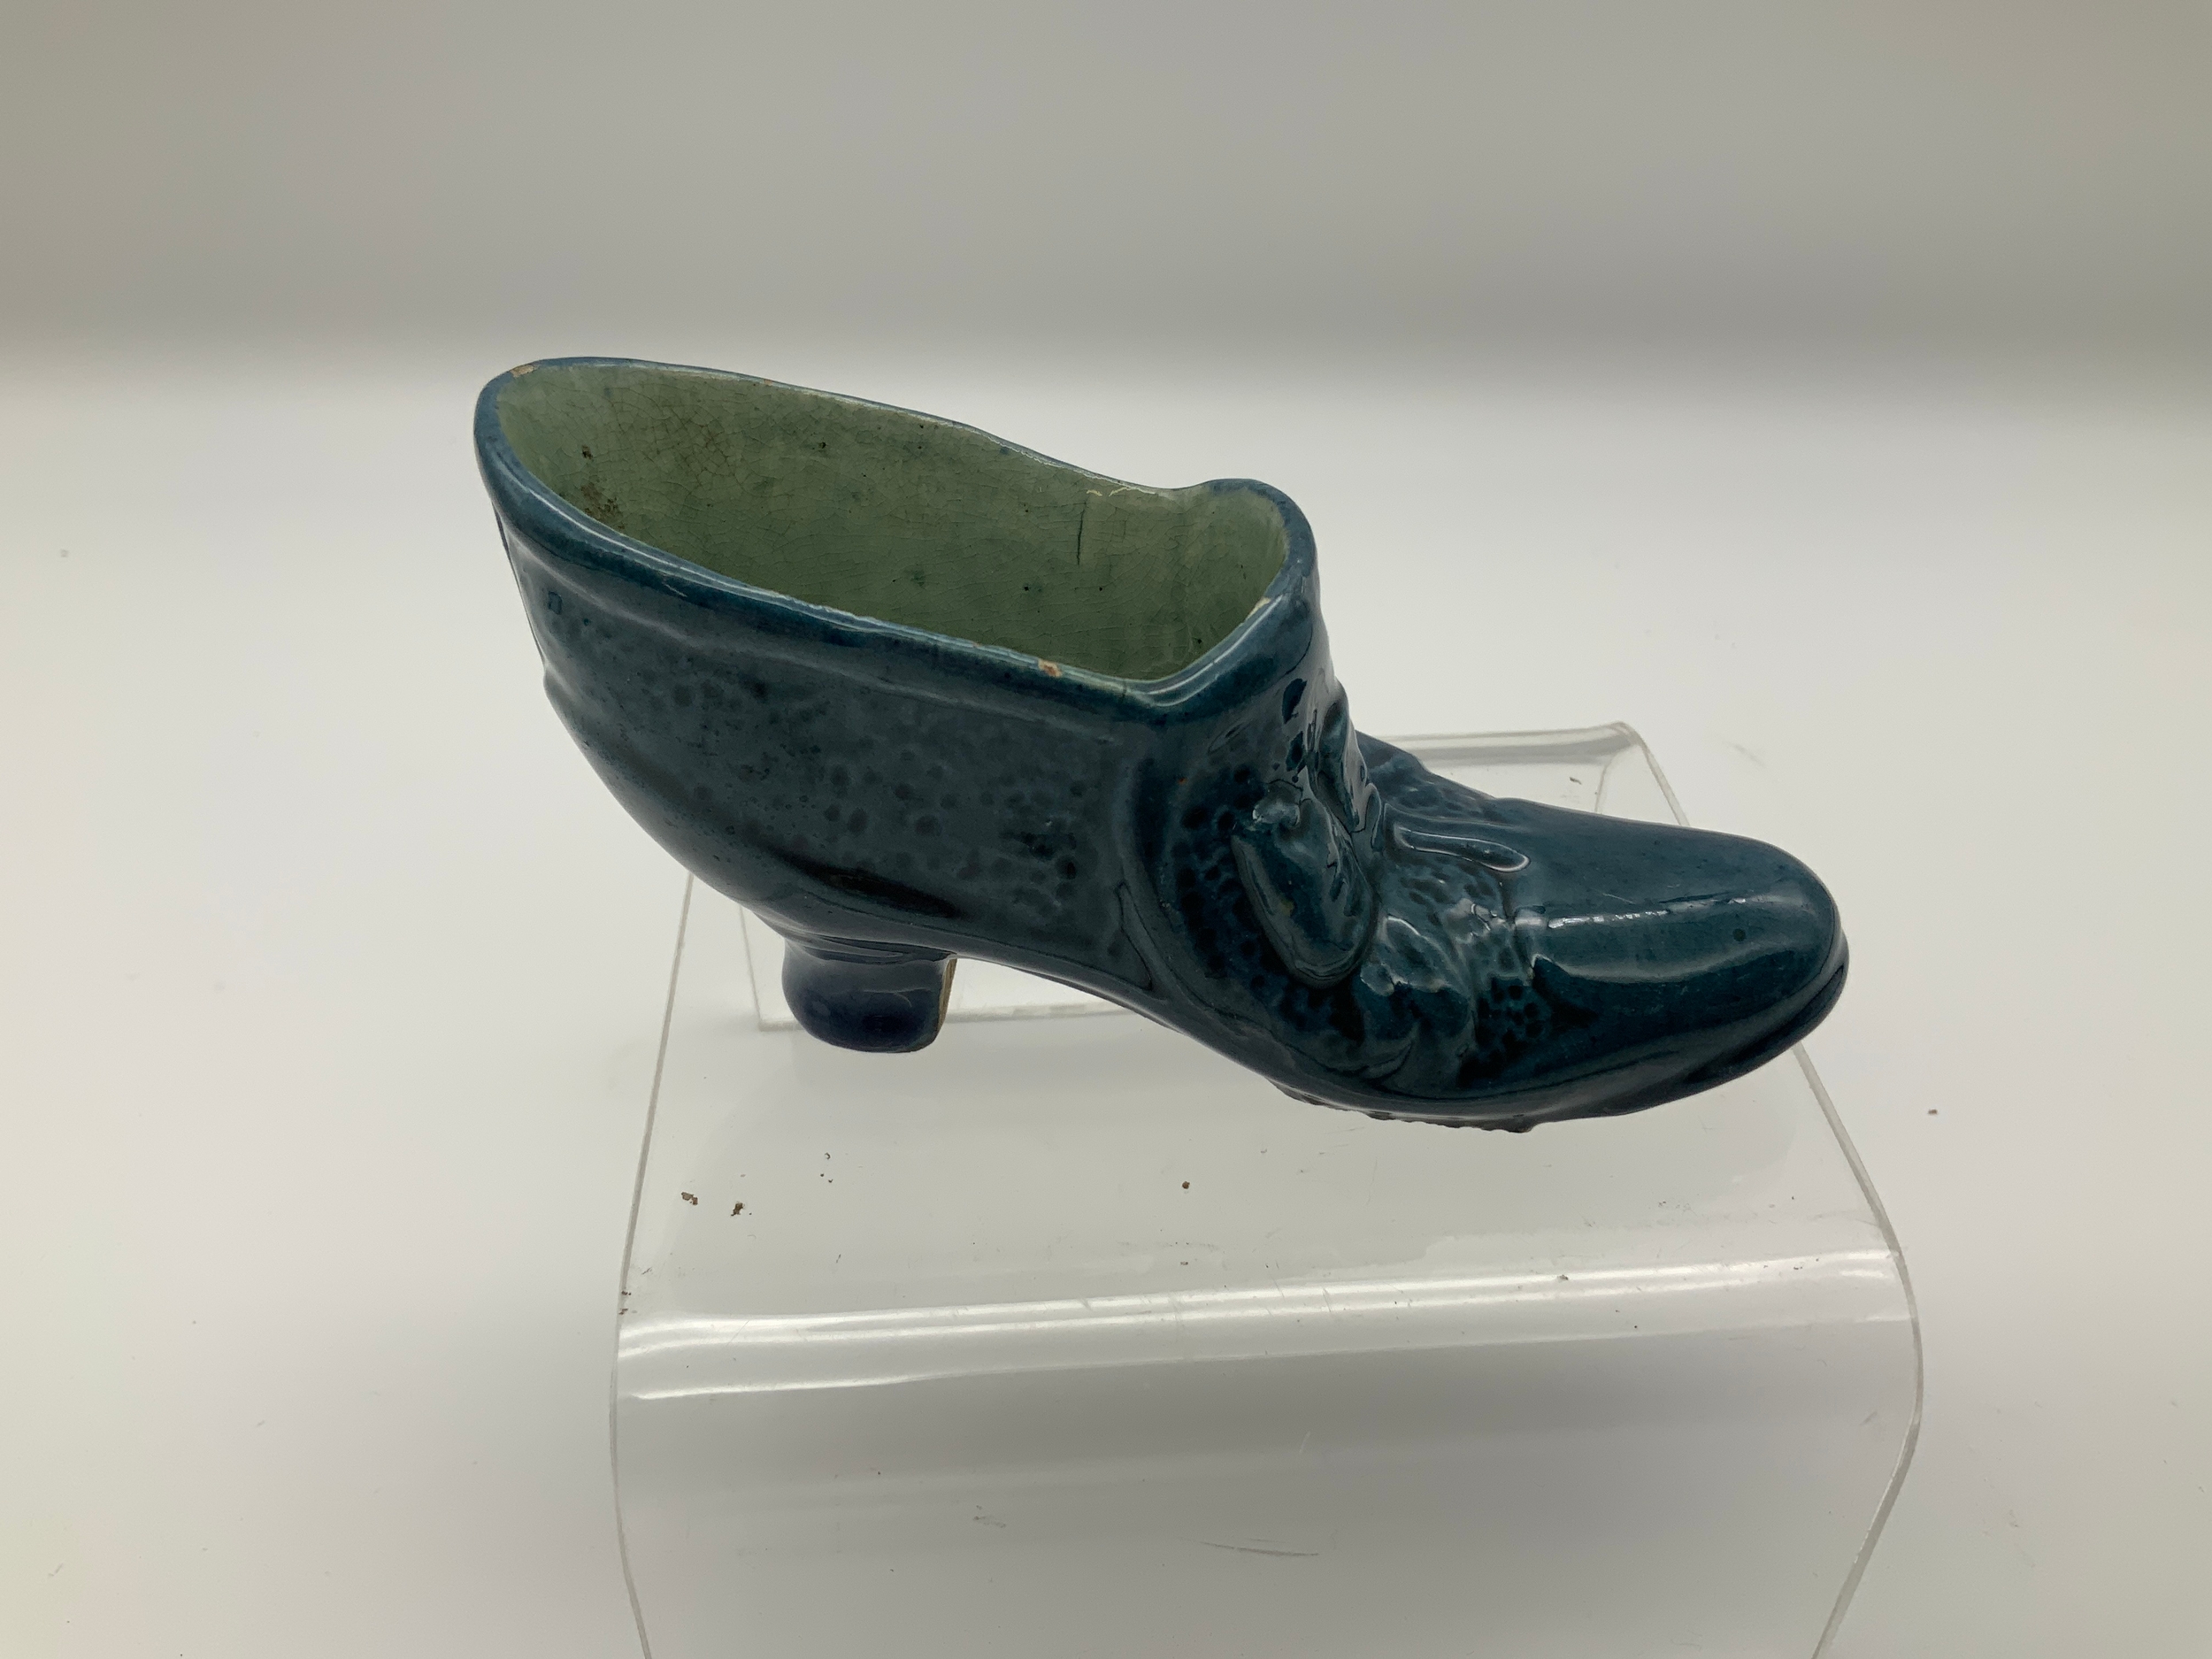 Lauder Shoe - 5cm High - From the Collection of the Late Barry Hancock